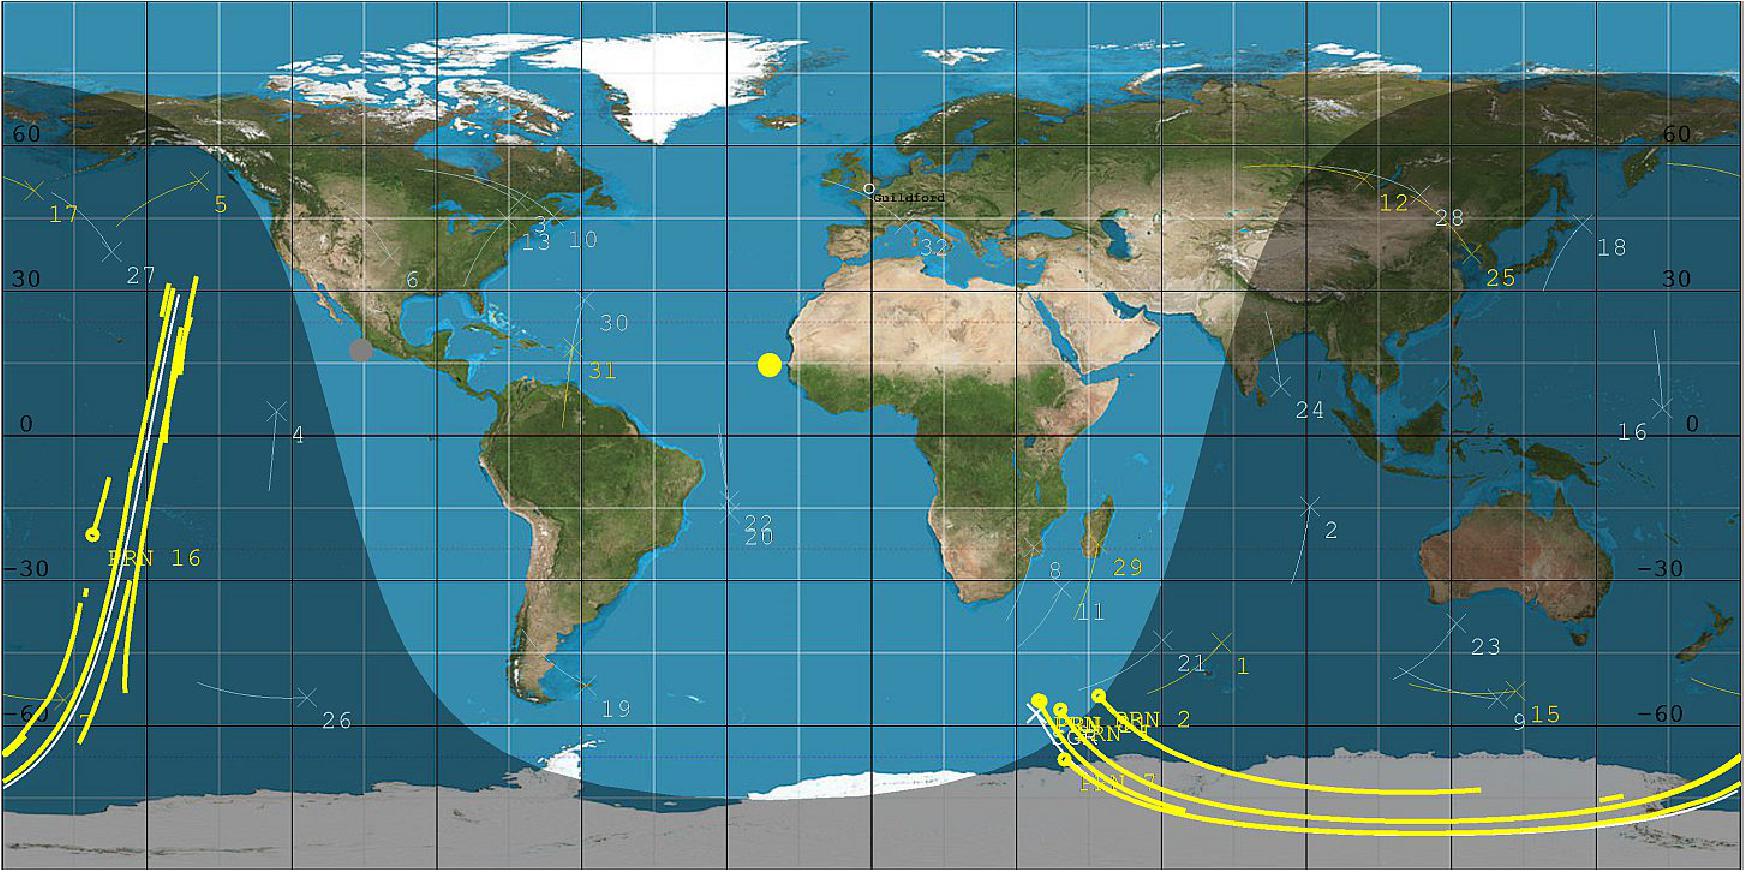 Figure 4: DoT-1 sub-satellite track (white) and GPS reflection tracks (yellow) collected during 40 minute data operation (image credit: SSTL)